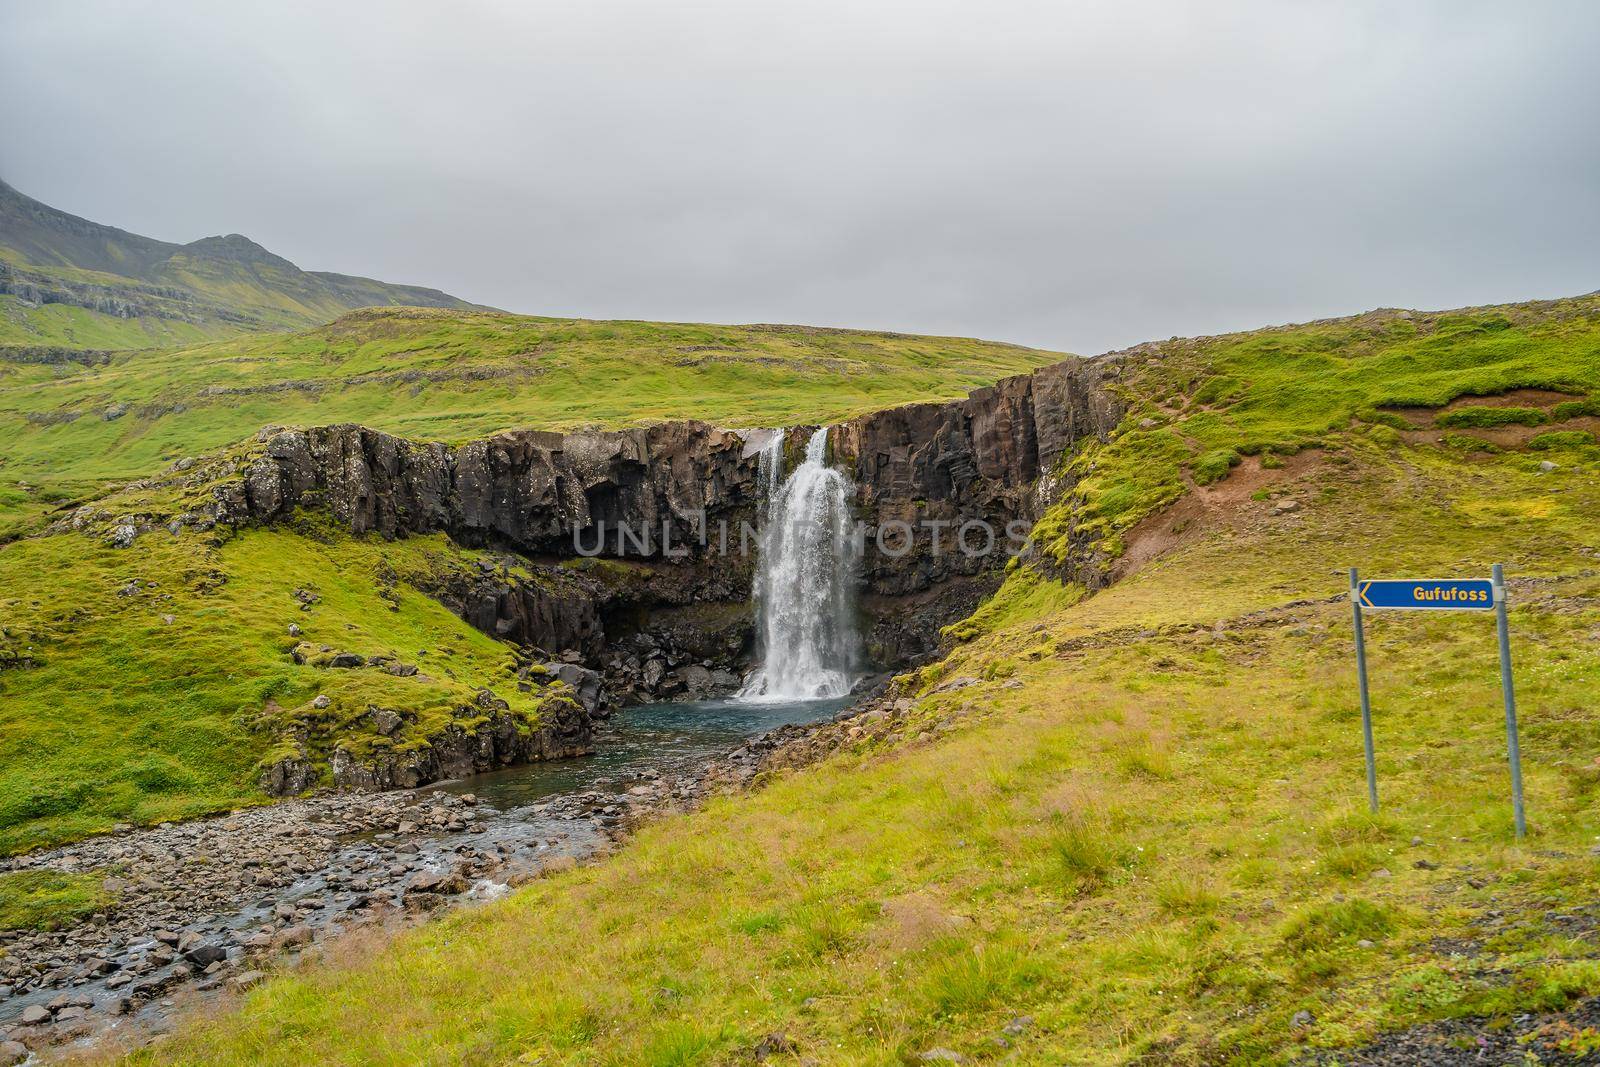 Lonely waterfall called Gufufoss near the road with a sign spelt its name at East Iceland, summer by neurobite